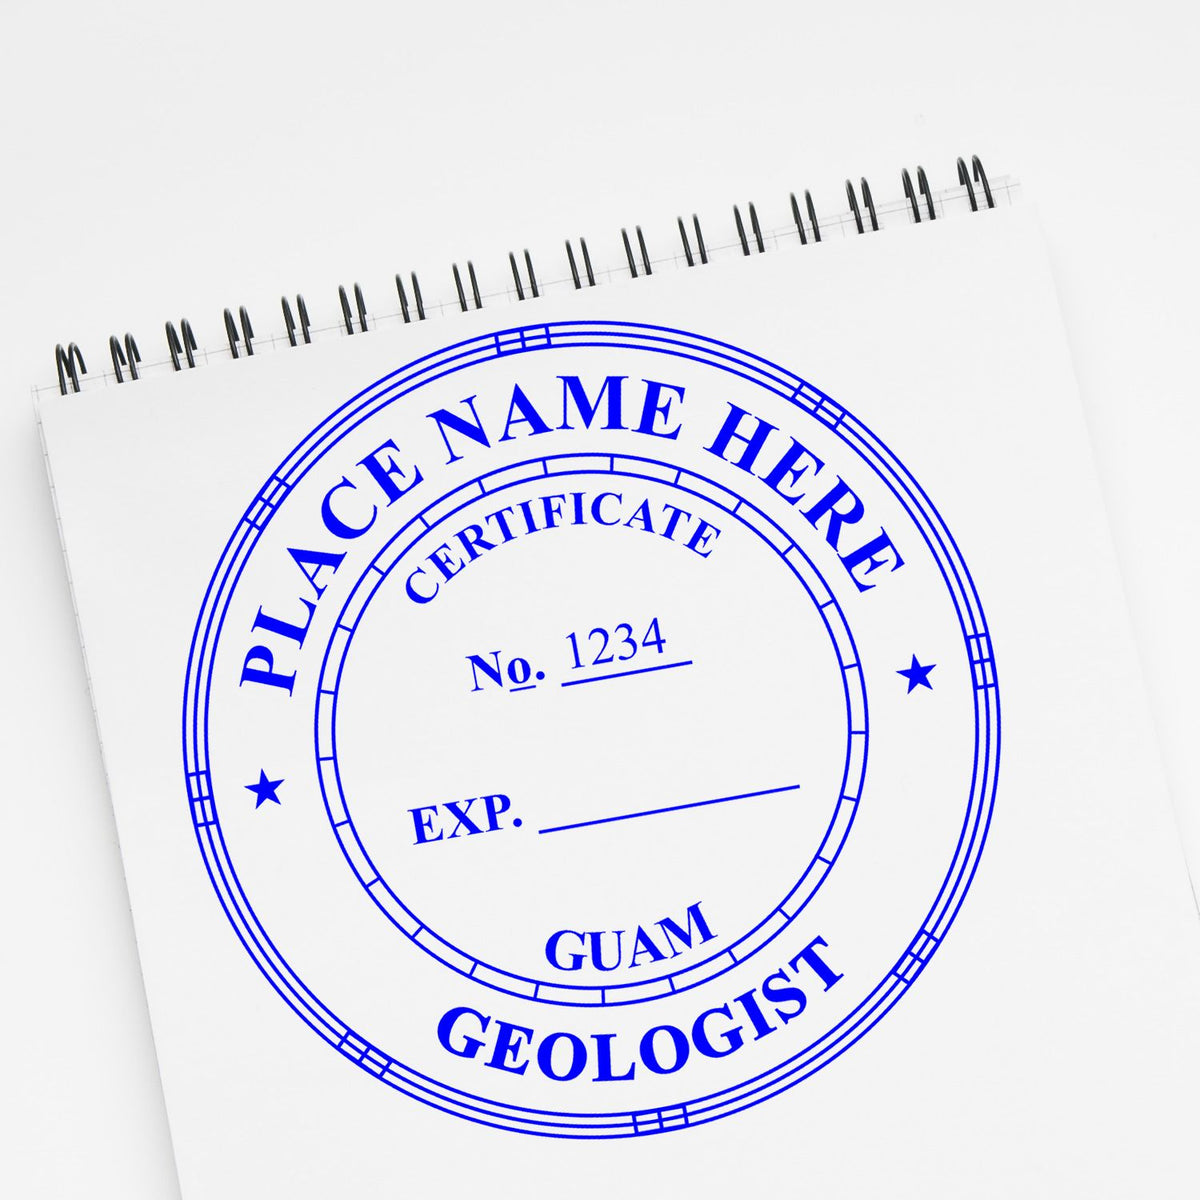 This paper is stamped with a sample imprint of the Self-Inking Guam Geologist Stamp, signifying its quality and reliability.